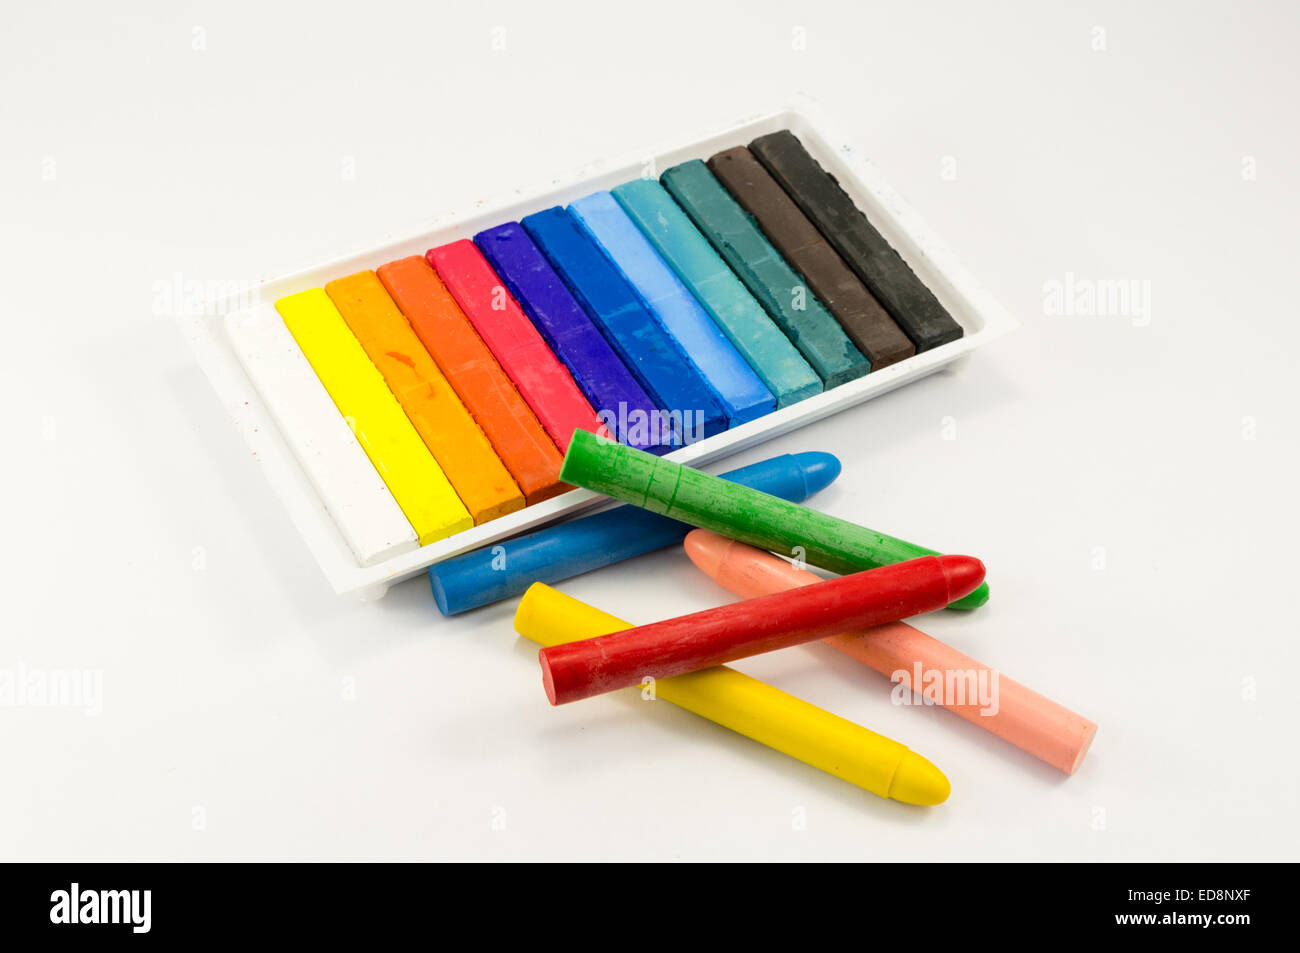 https://c8.alamy.com/comp/ED8NXF/materials-for-drawing-chalk-and-colored-crayons-ED8NXF.jpg